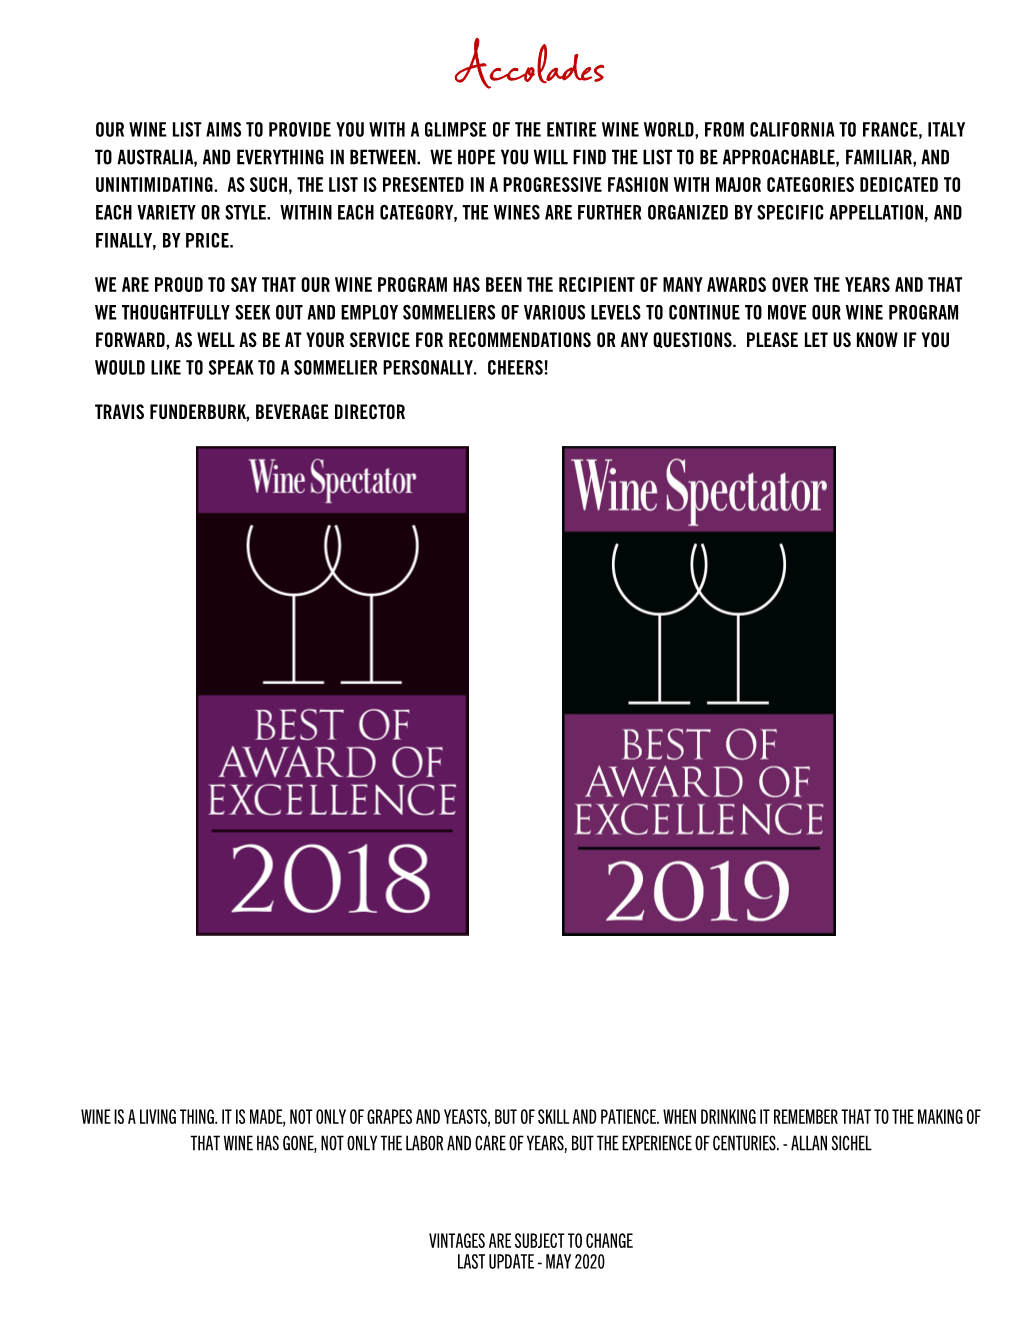 Accolades OUR WINE LIST AIMS to PROVIDE YOU with a GLIMPSE of the ENTIRE WINE WORLD, from CALIFORNIA to FRANCE, ITALY to AUSTRALIA, and EVERYTHING in BETWEEN